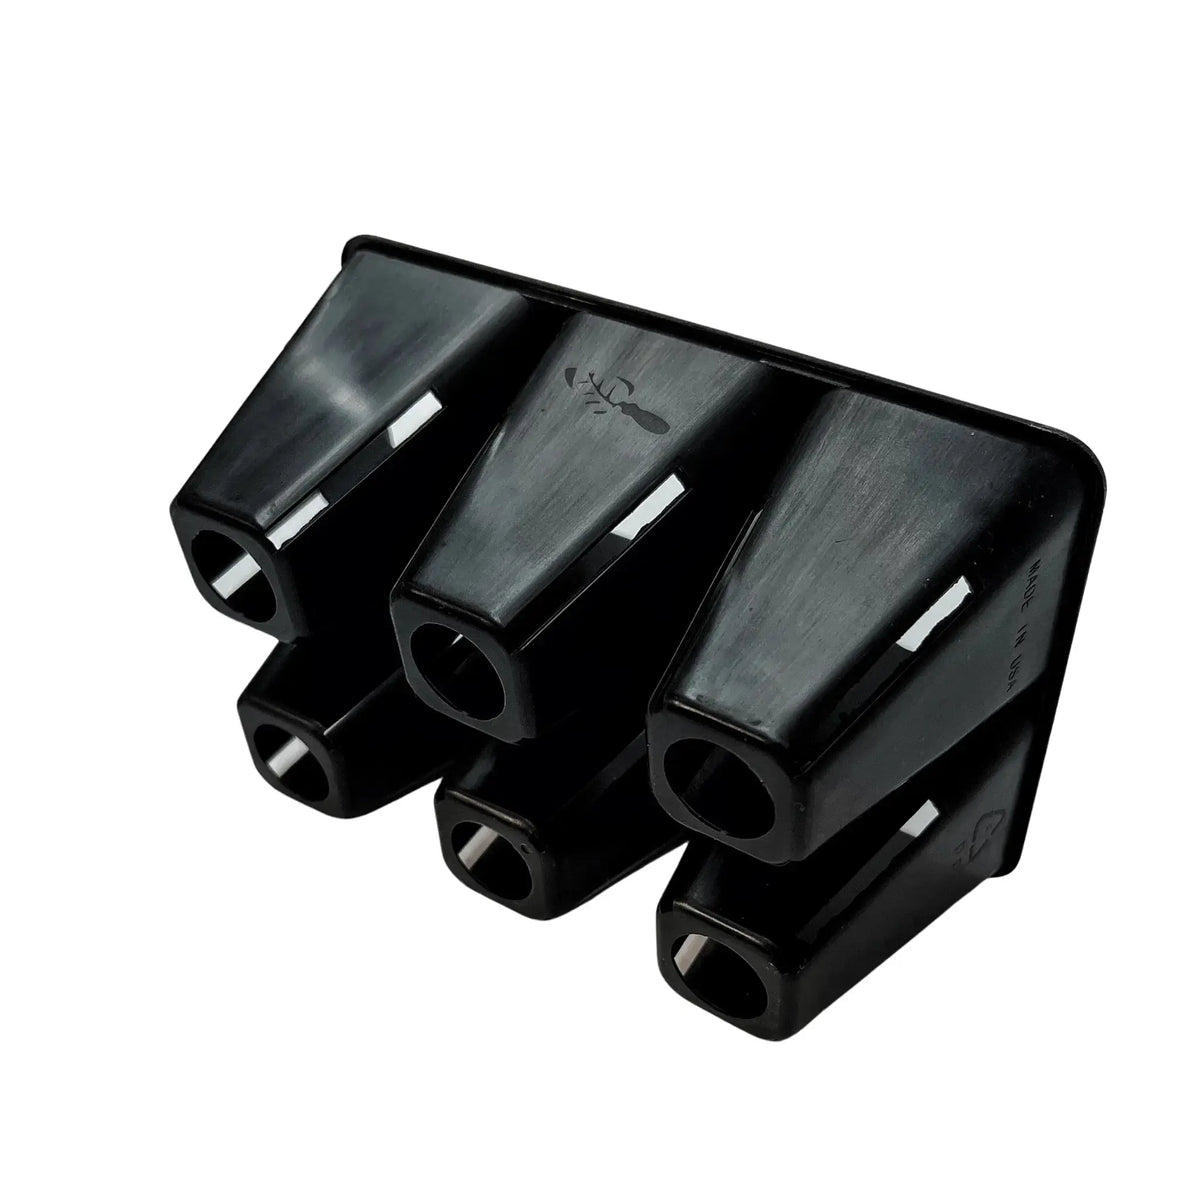 Bootstrap Farmer 6 Cell Plug Tray Inserts | Black